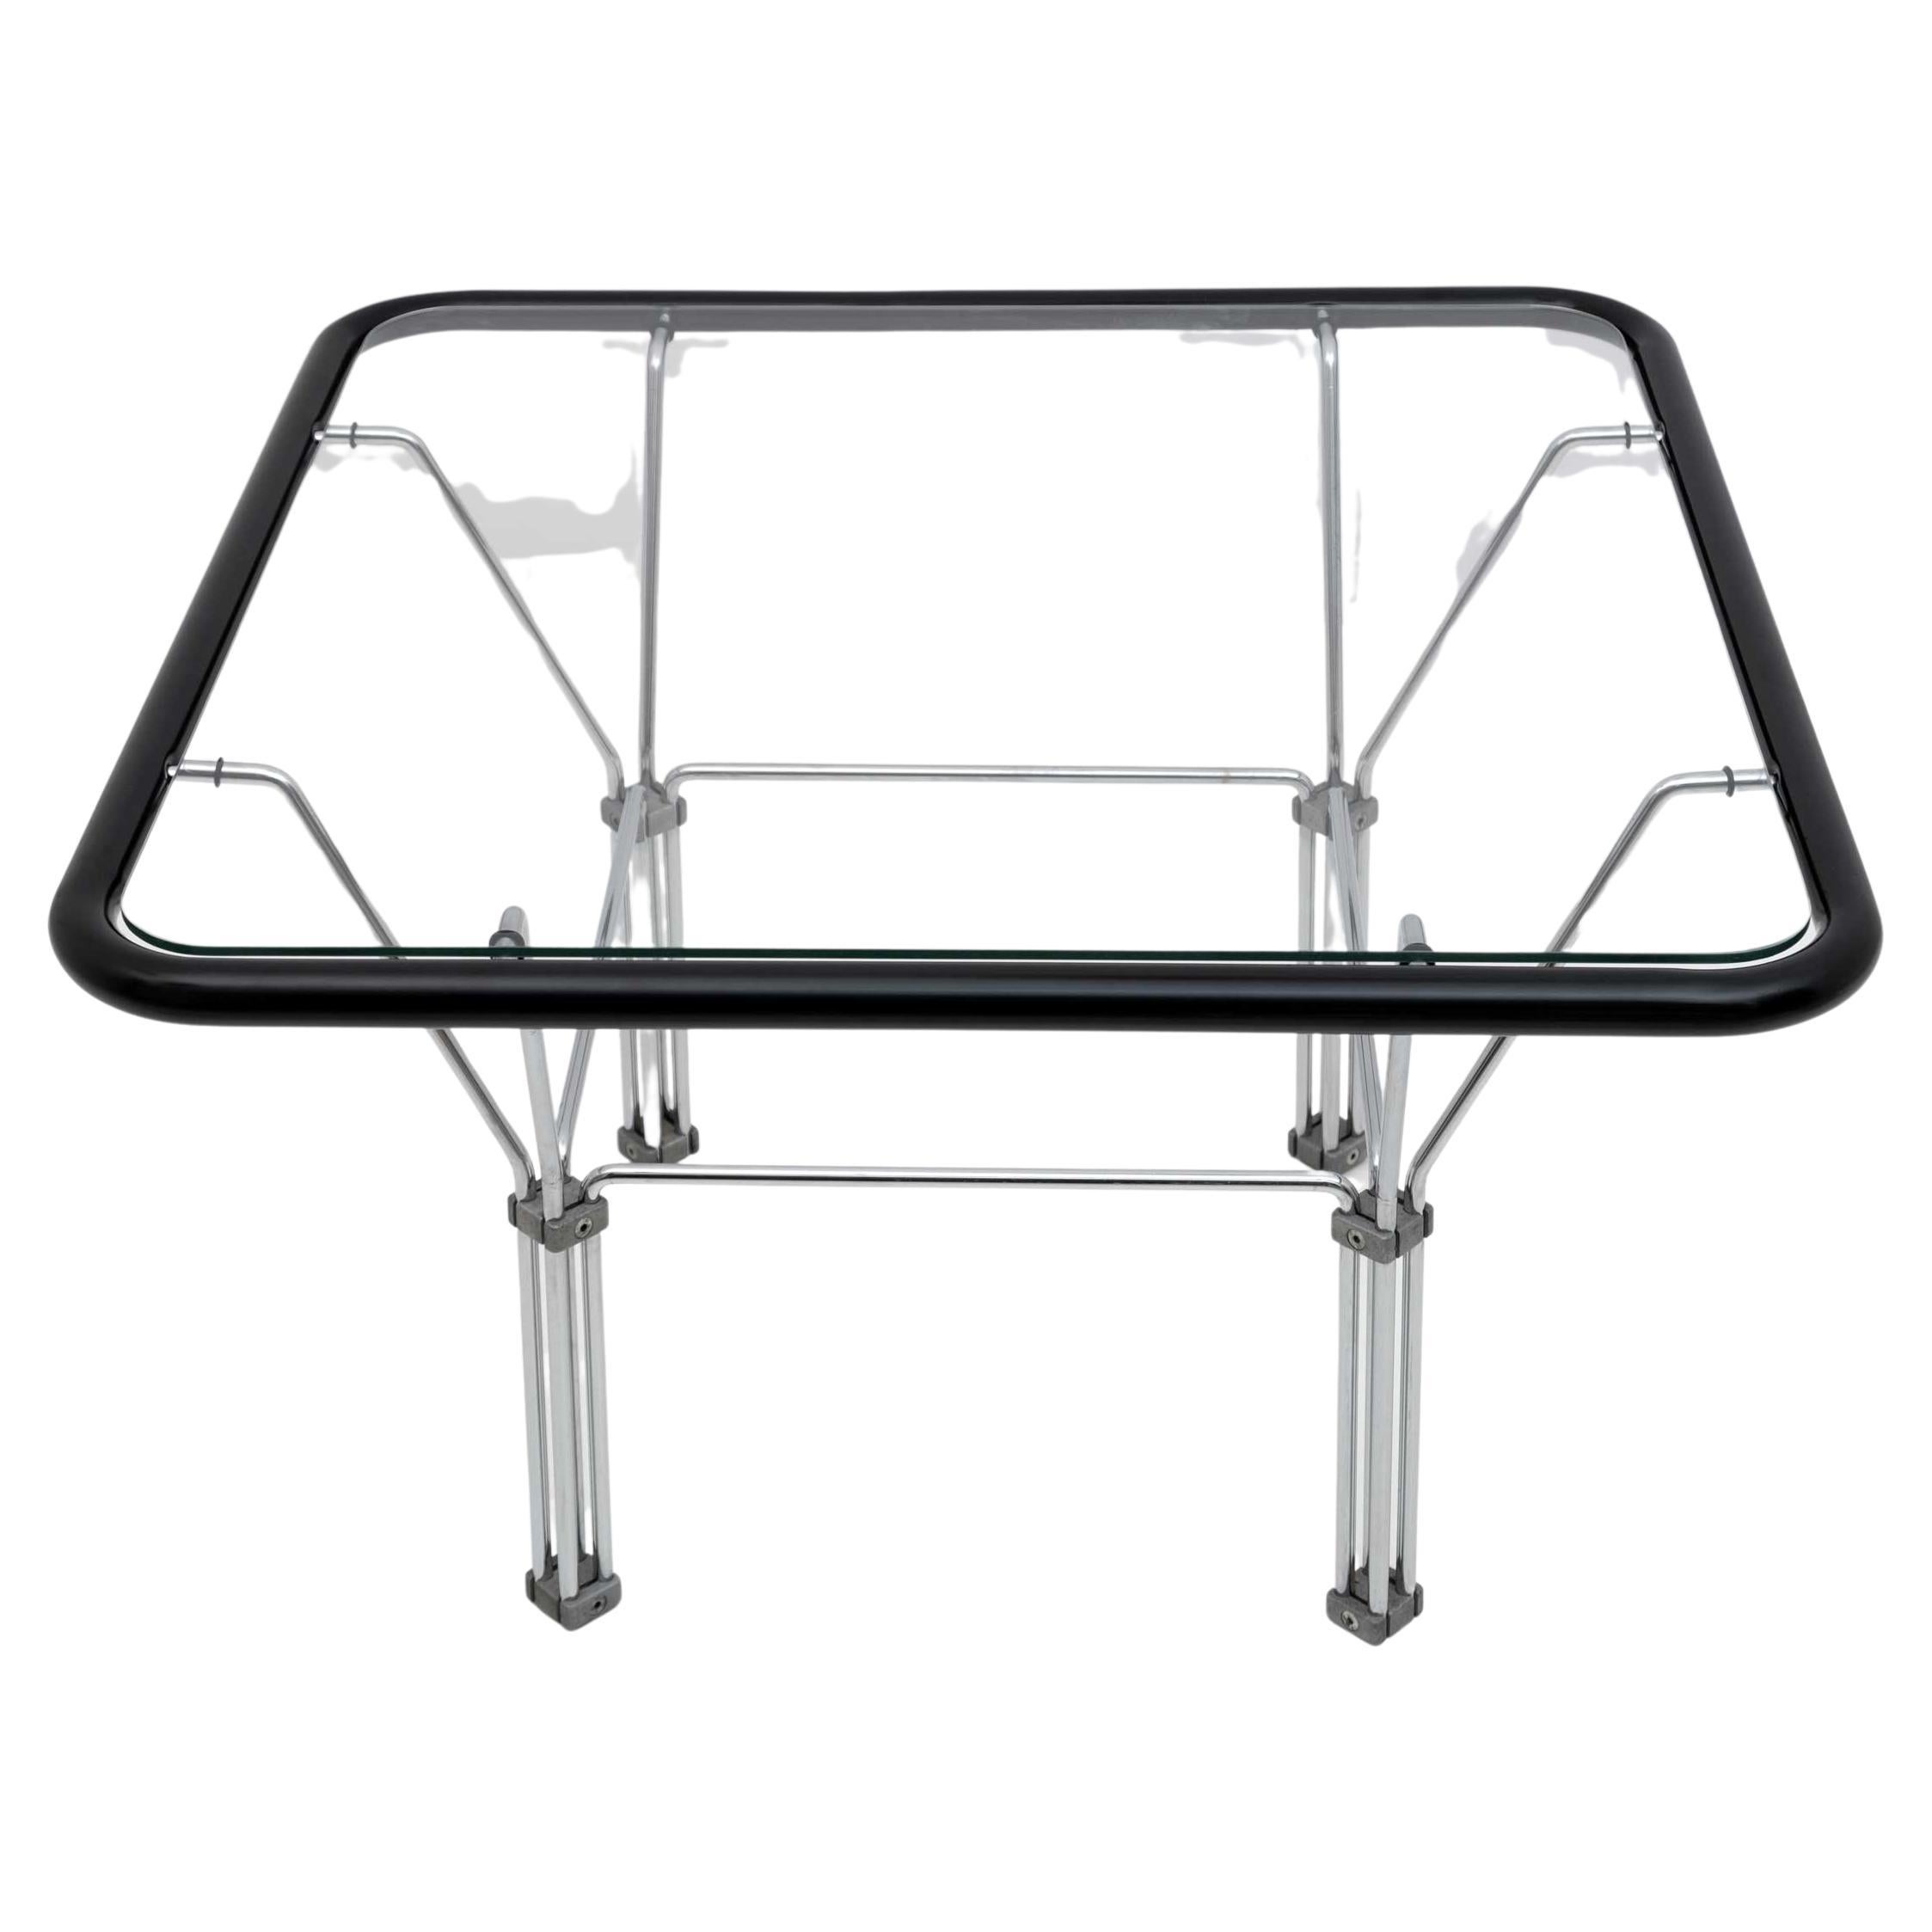 Attributed Niels Bendtsen Post Modern Crystal and Steel Coffee Table, 1970s For Sale